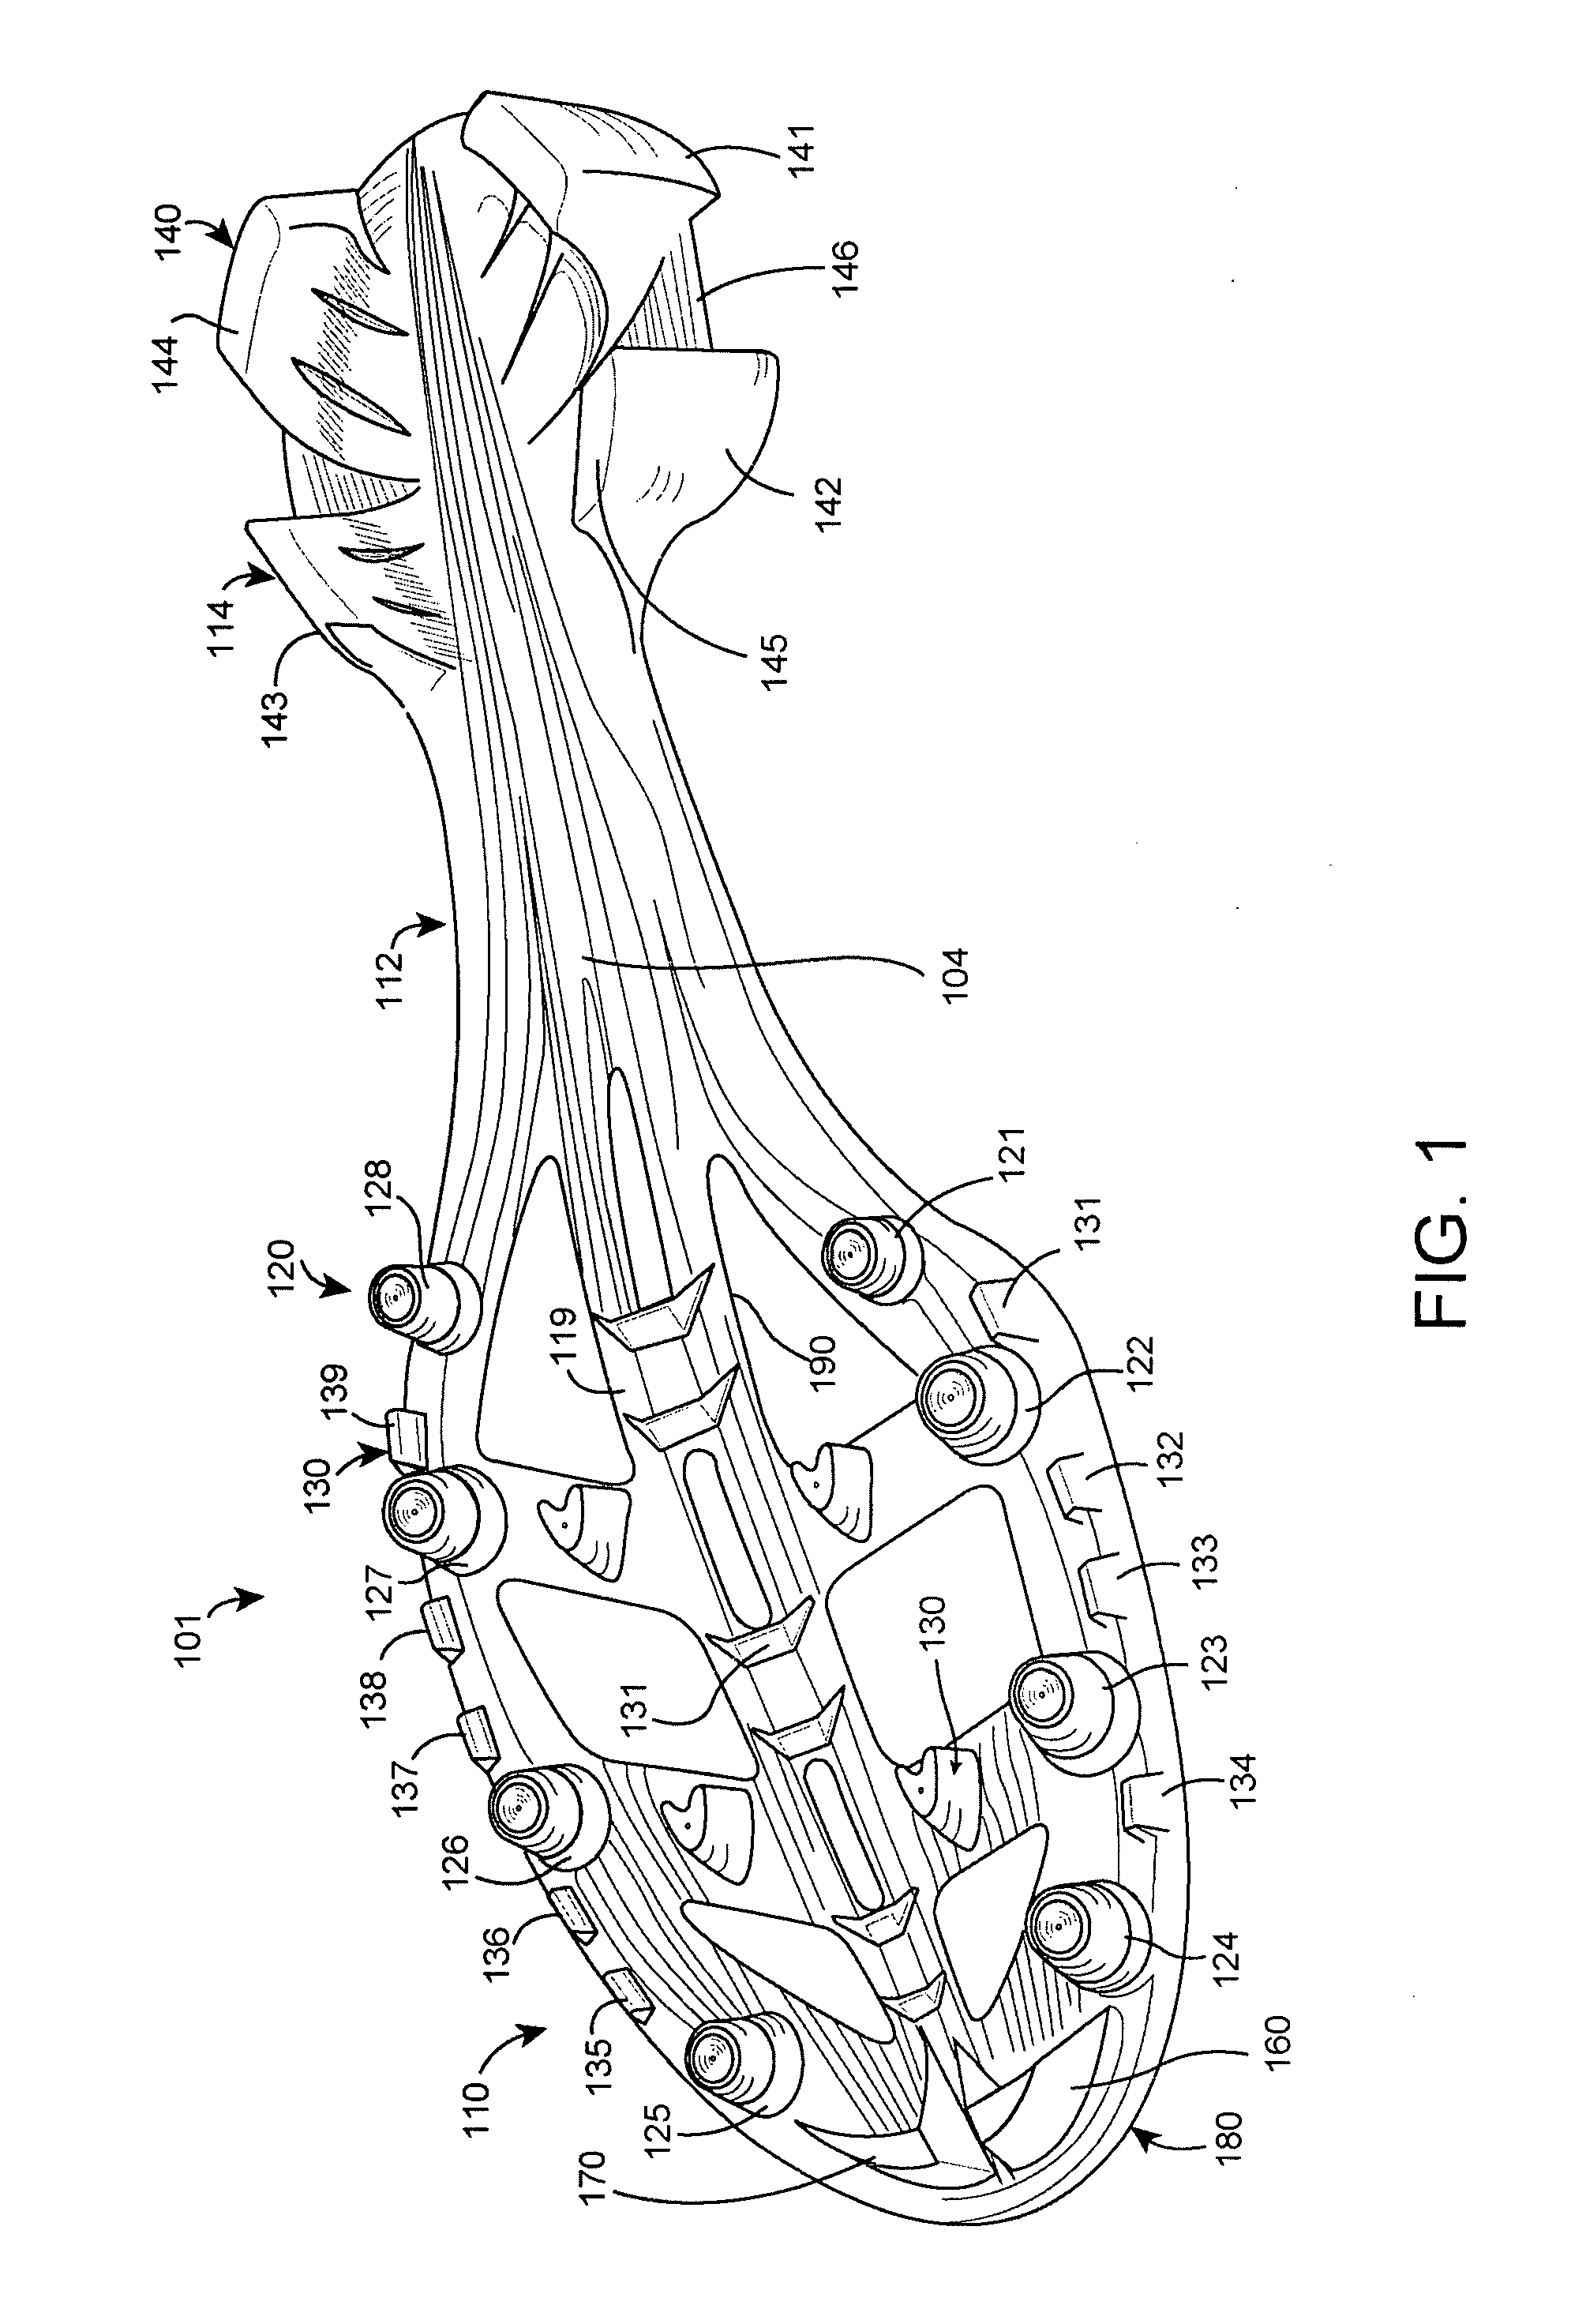 Article of Footwear with Walled Cleat System